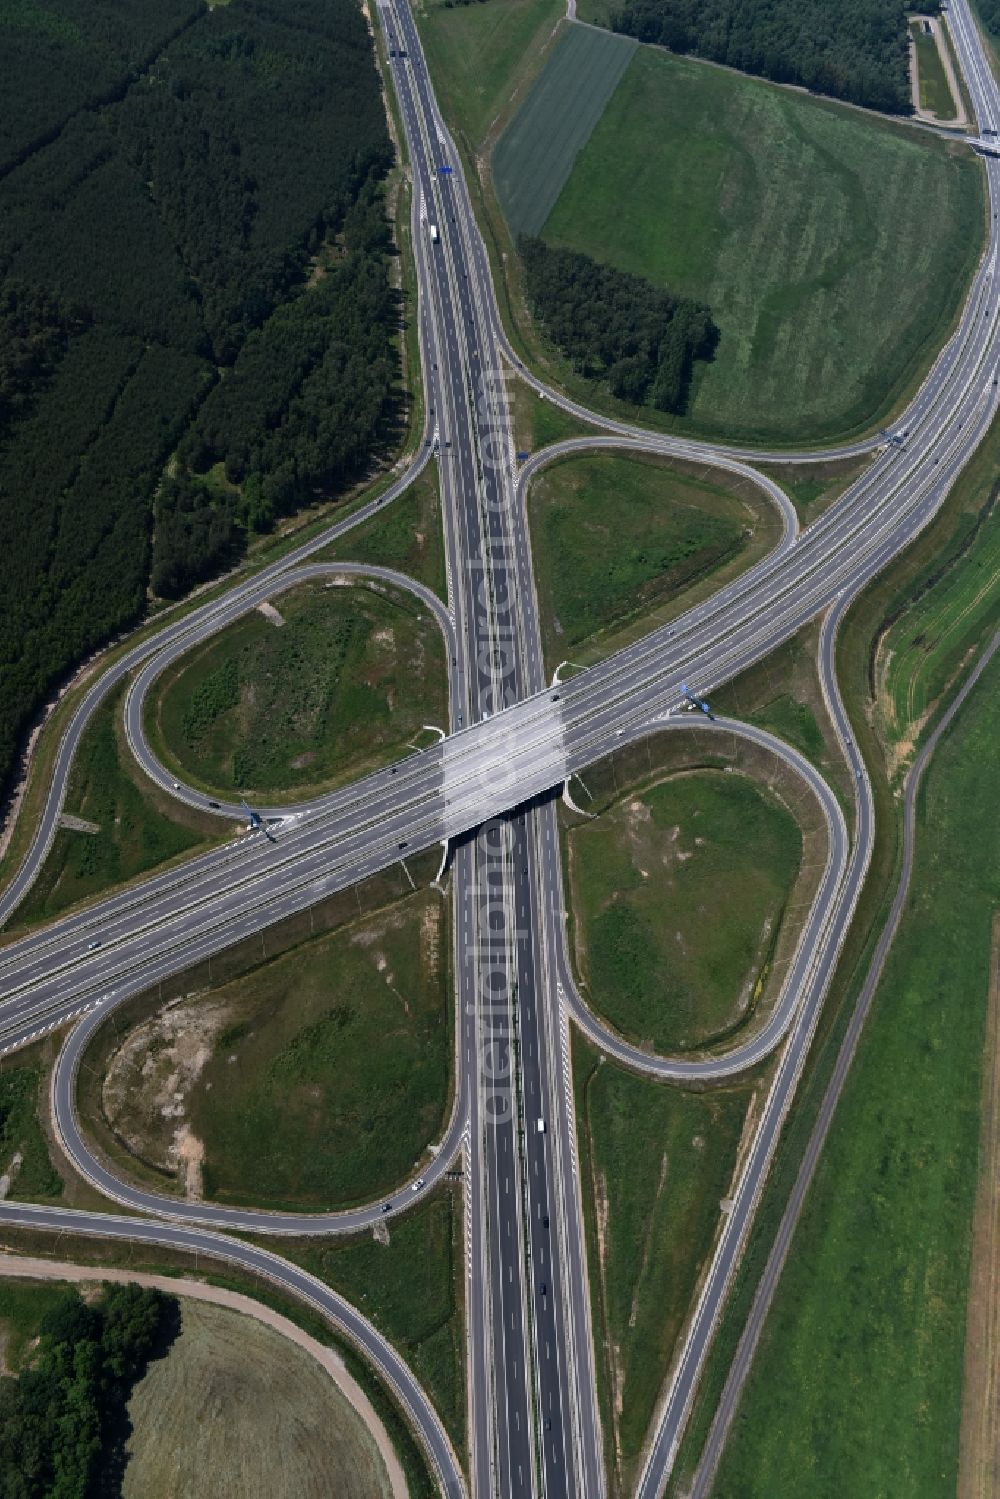 Aerial photograph Wöbbelin - Site of the highway triangle Schwerin on the motorway BAB A14 and A24 at Woebbelin in Mecklenburg - Western Pomerania